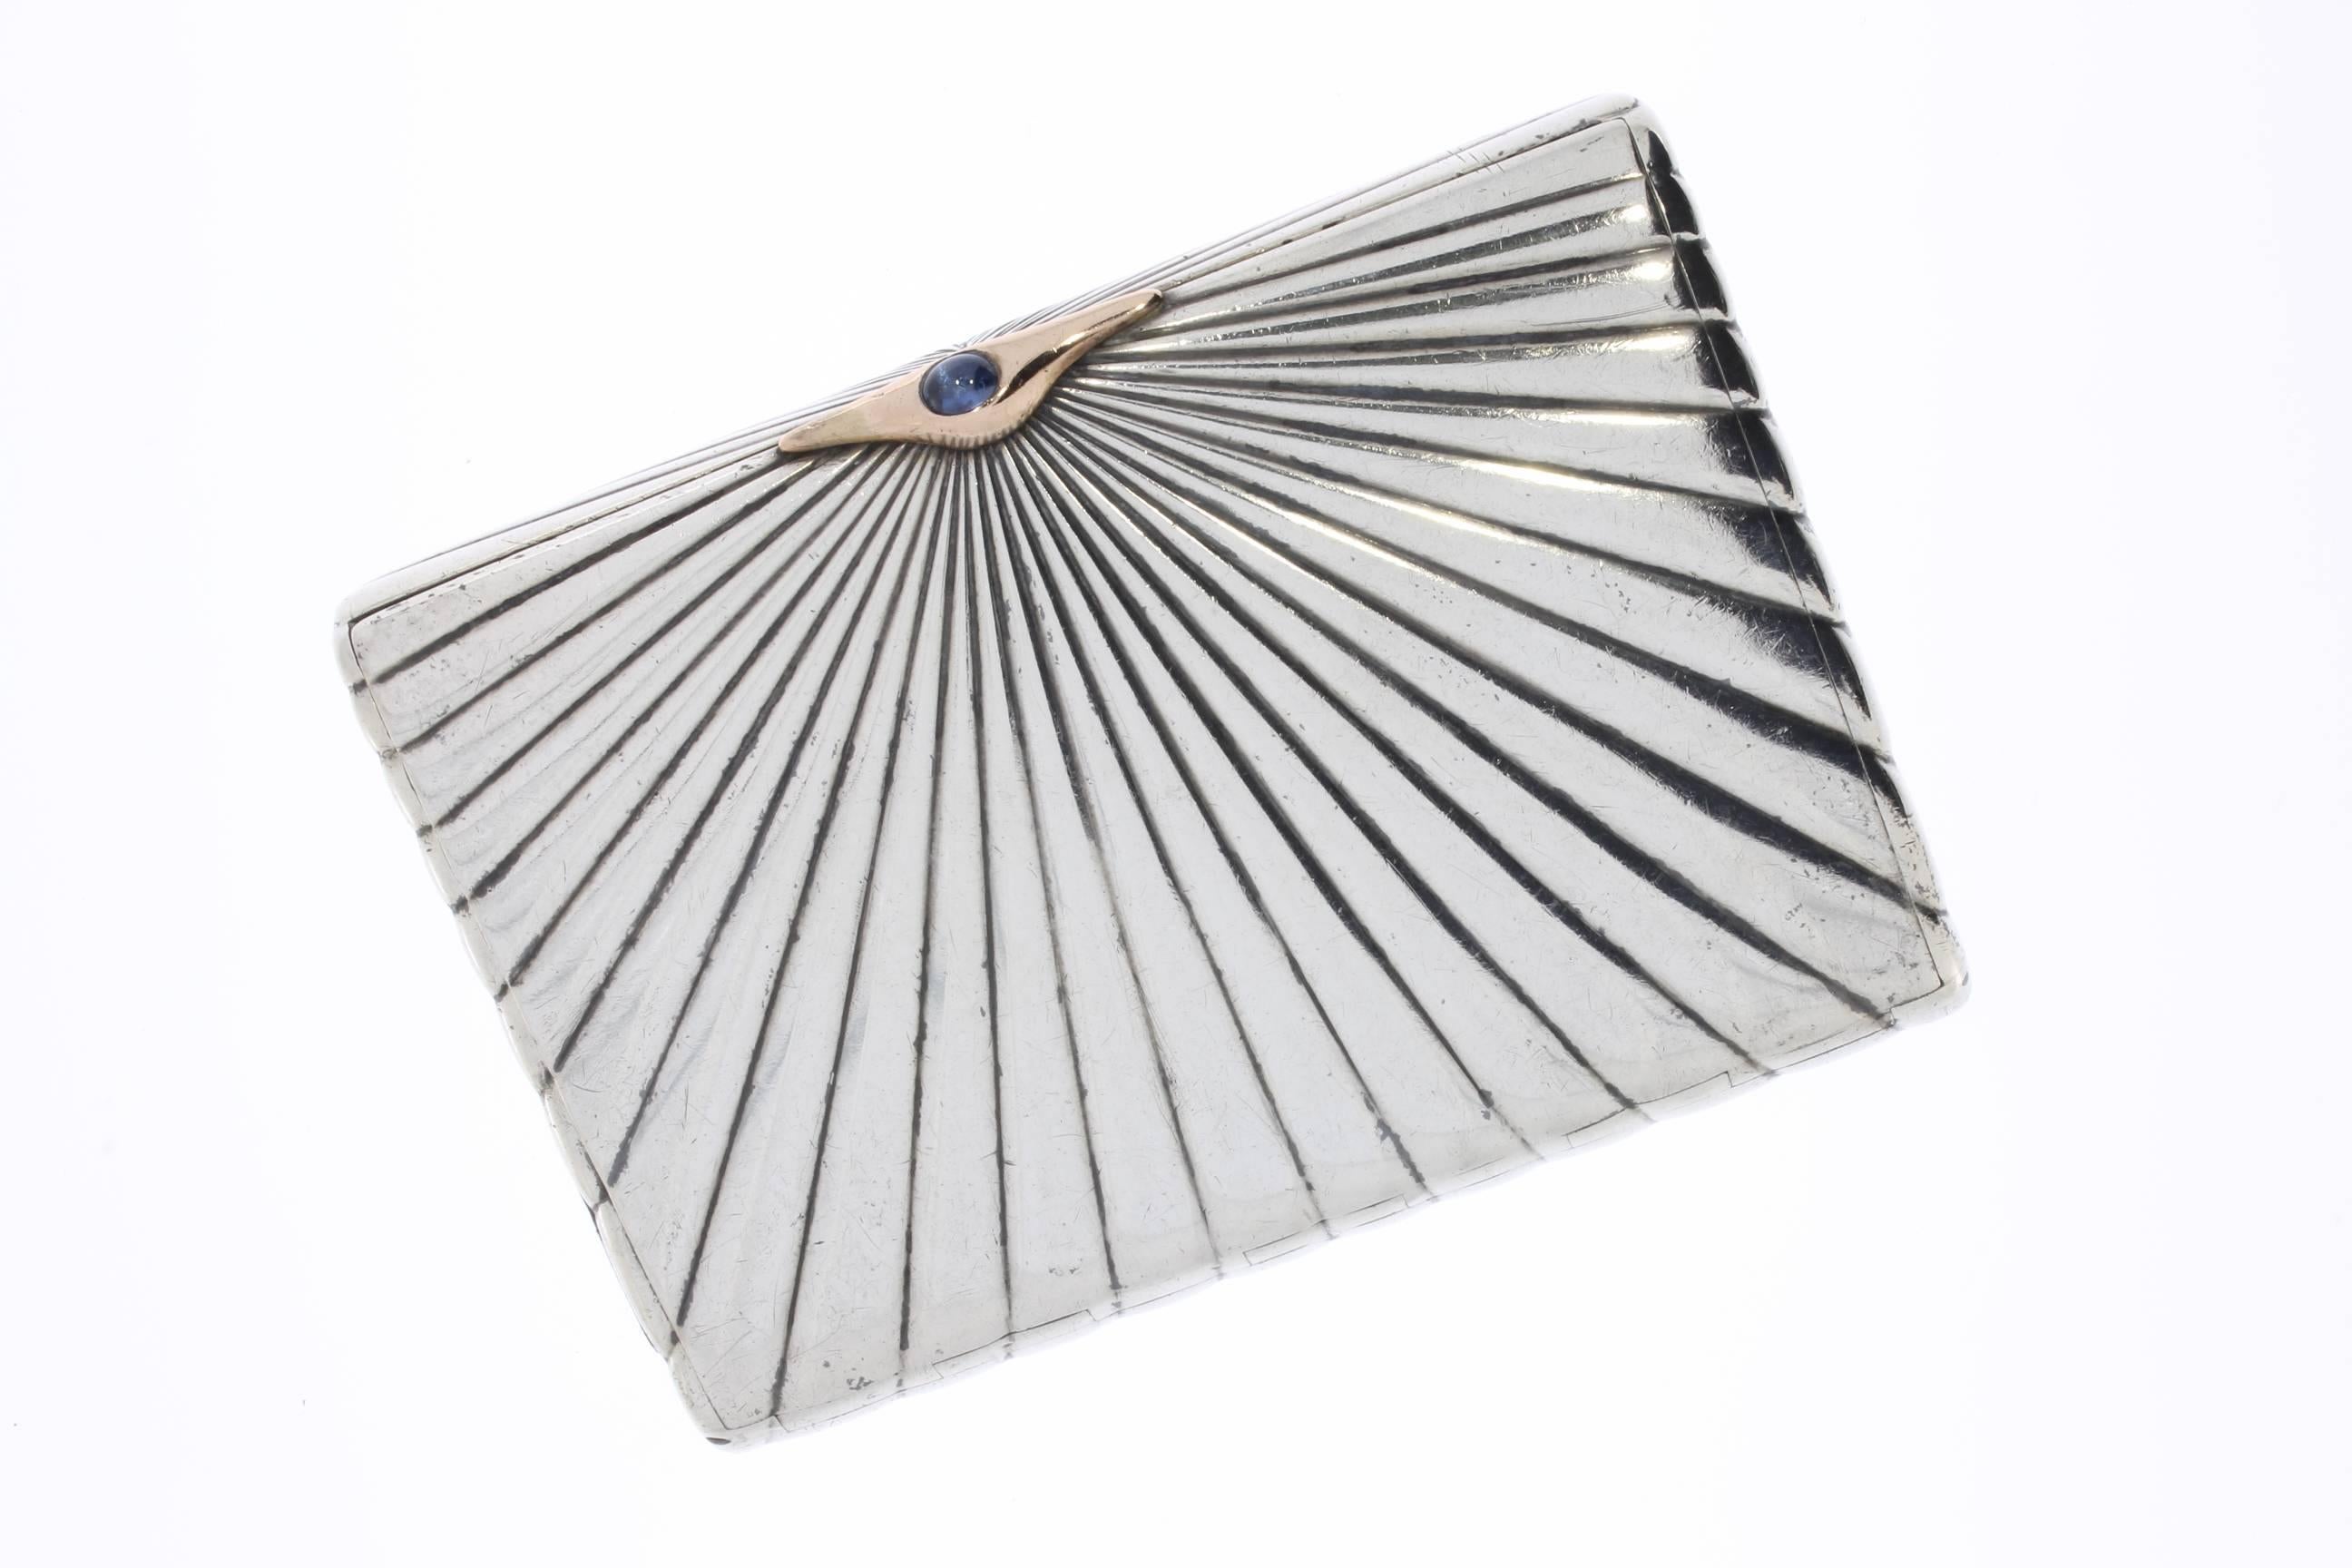 This Art Deco French sterling silver cigarette case was manufactured 1920s. Square shaped. Partial gilded. The lid has a snap lock with cabochon-cut sapphire. Hallmarked inside: Diana head, 84 BC. Total weight: 169.8 g.
The dimensions are 2.68 x